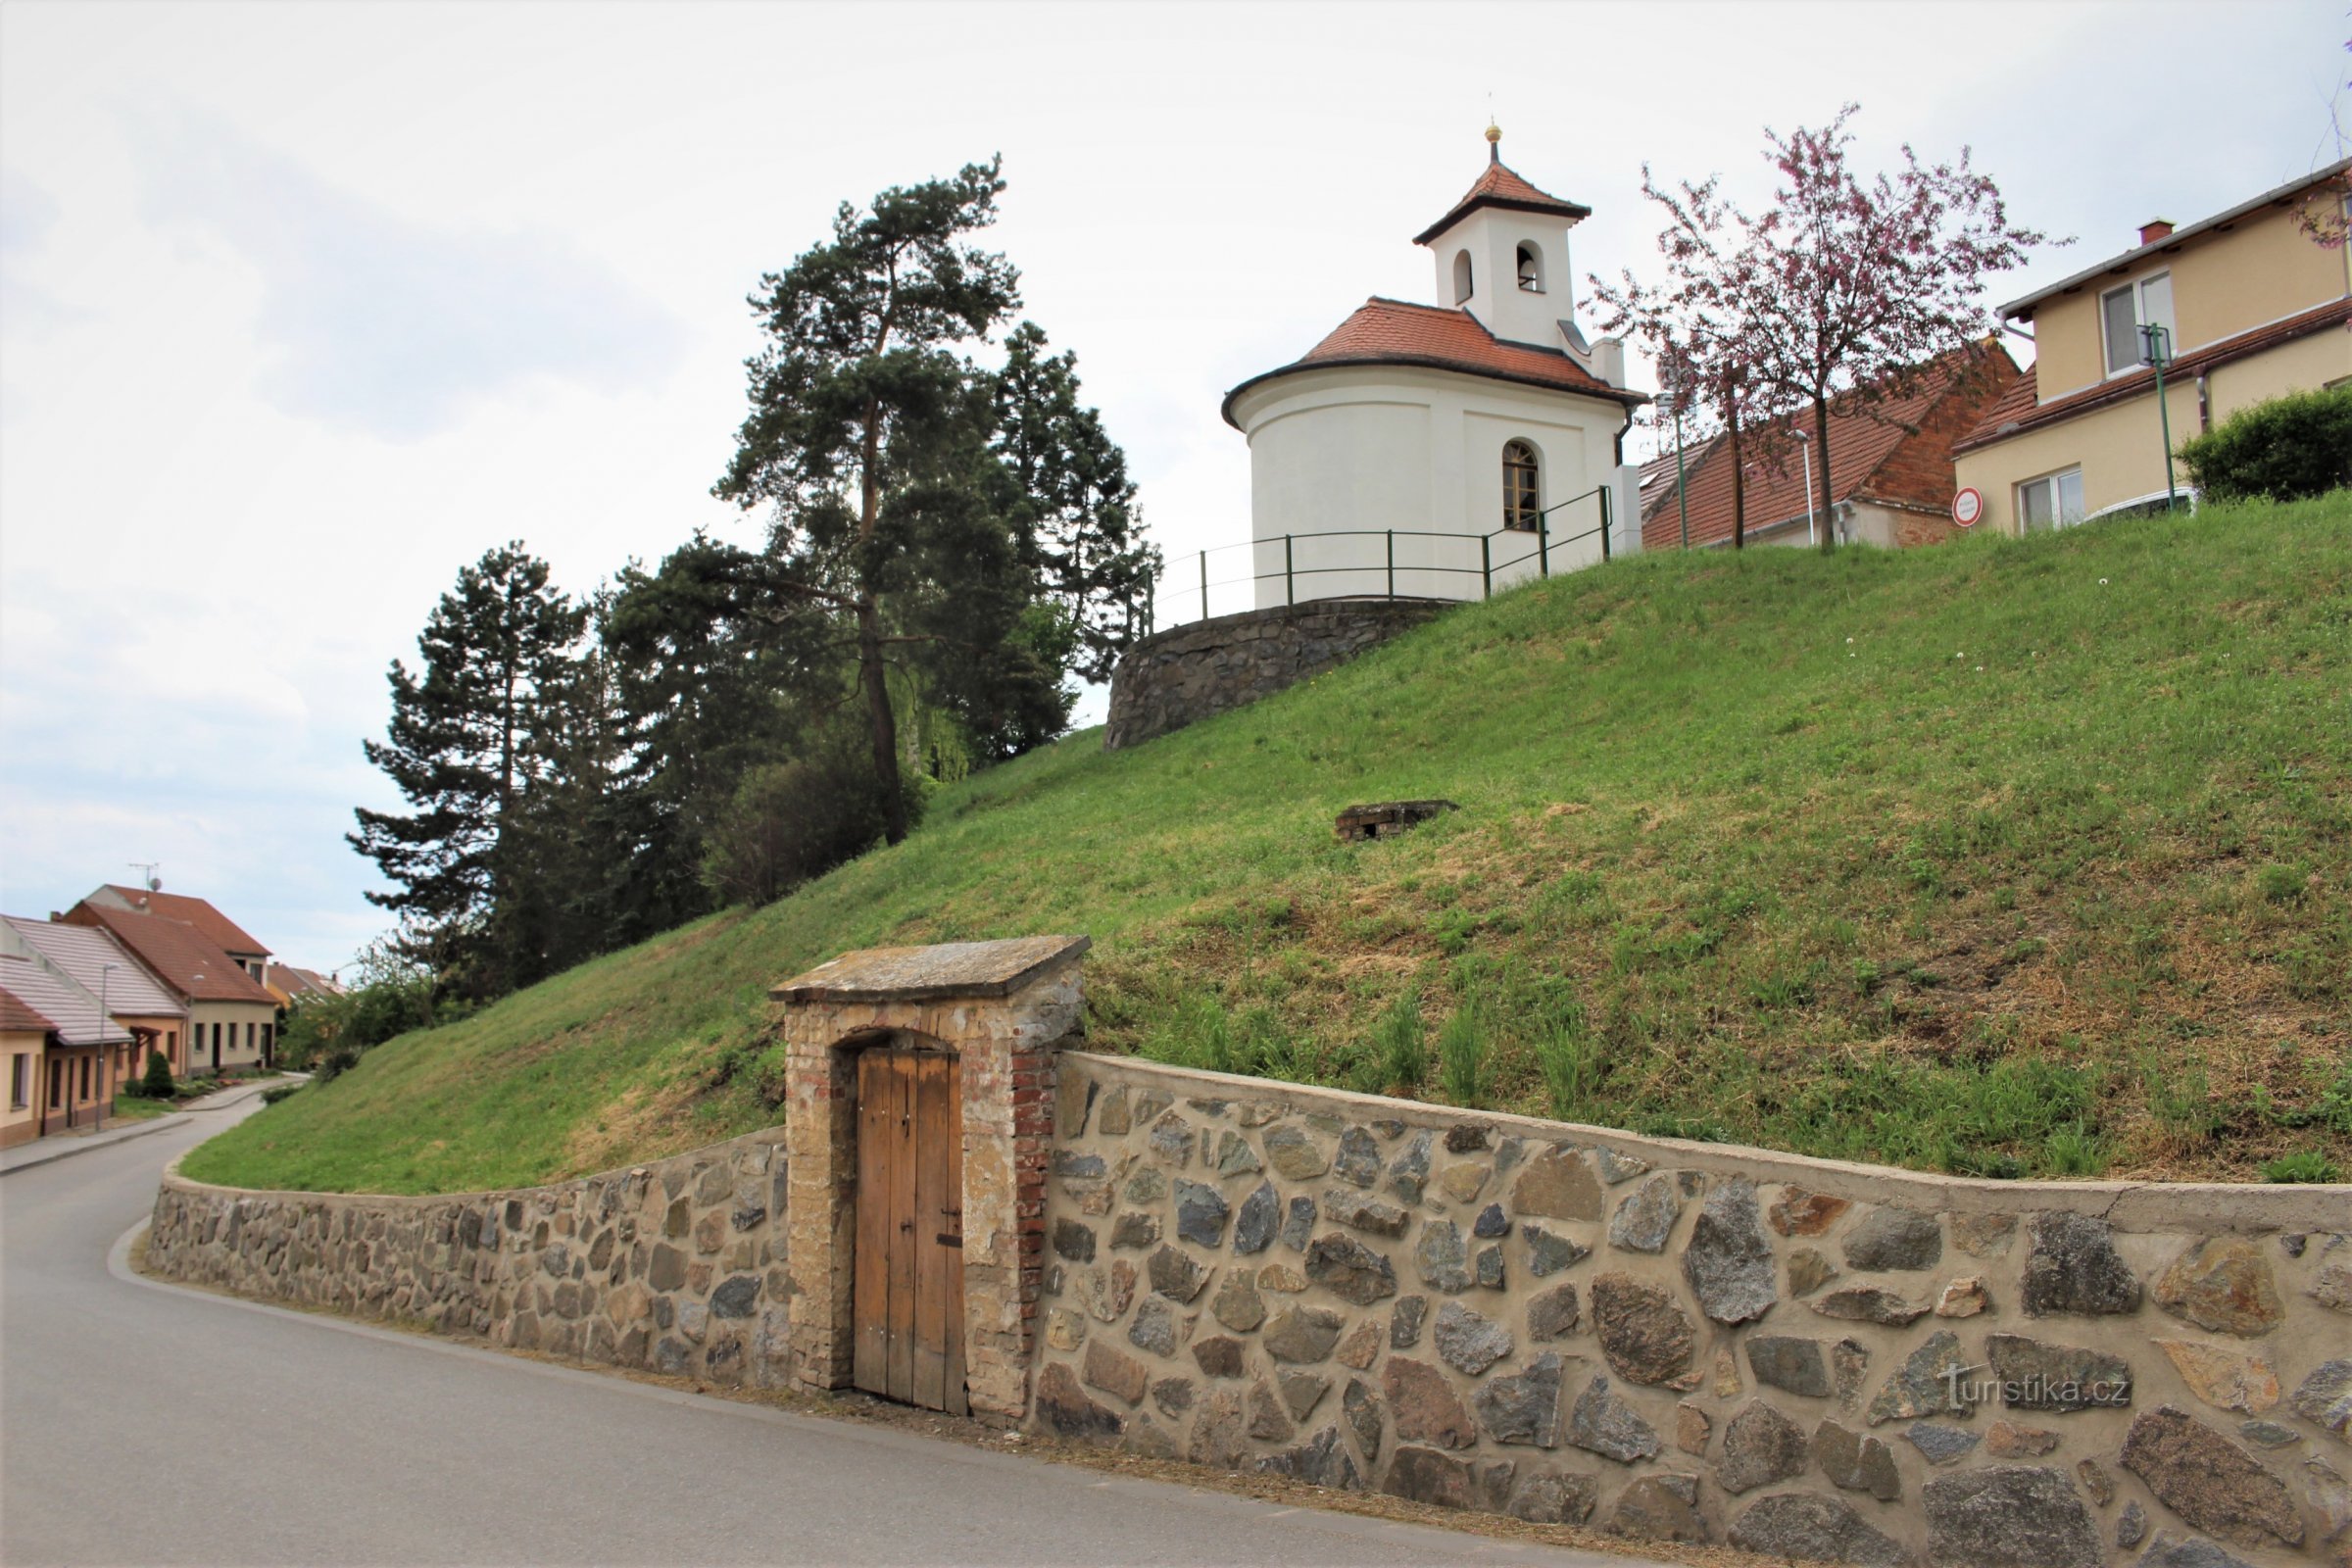 The chapel is located on the upper edge of the river terrace above the Vojkovický drive